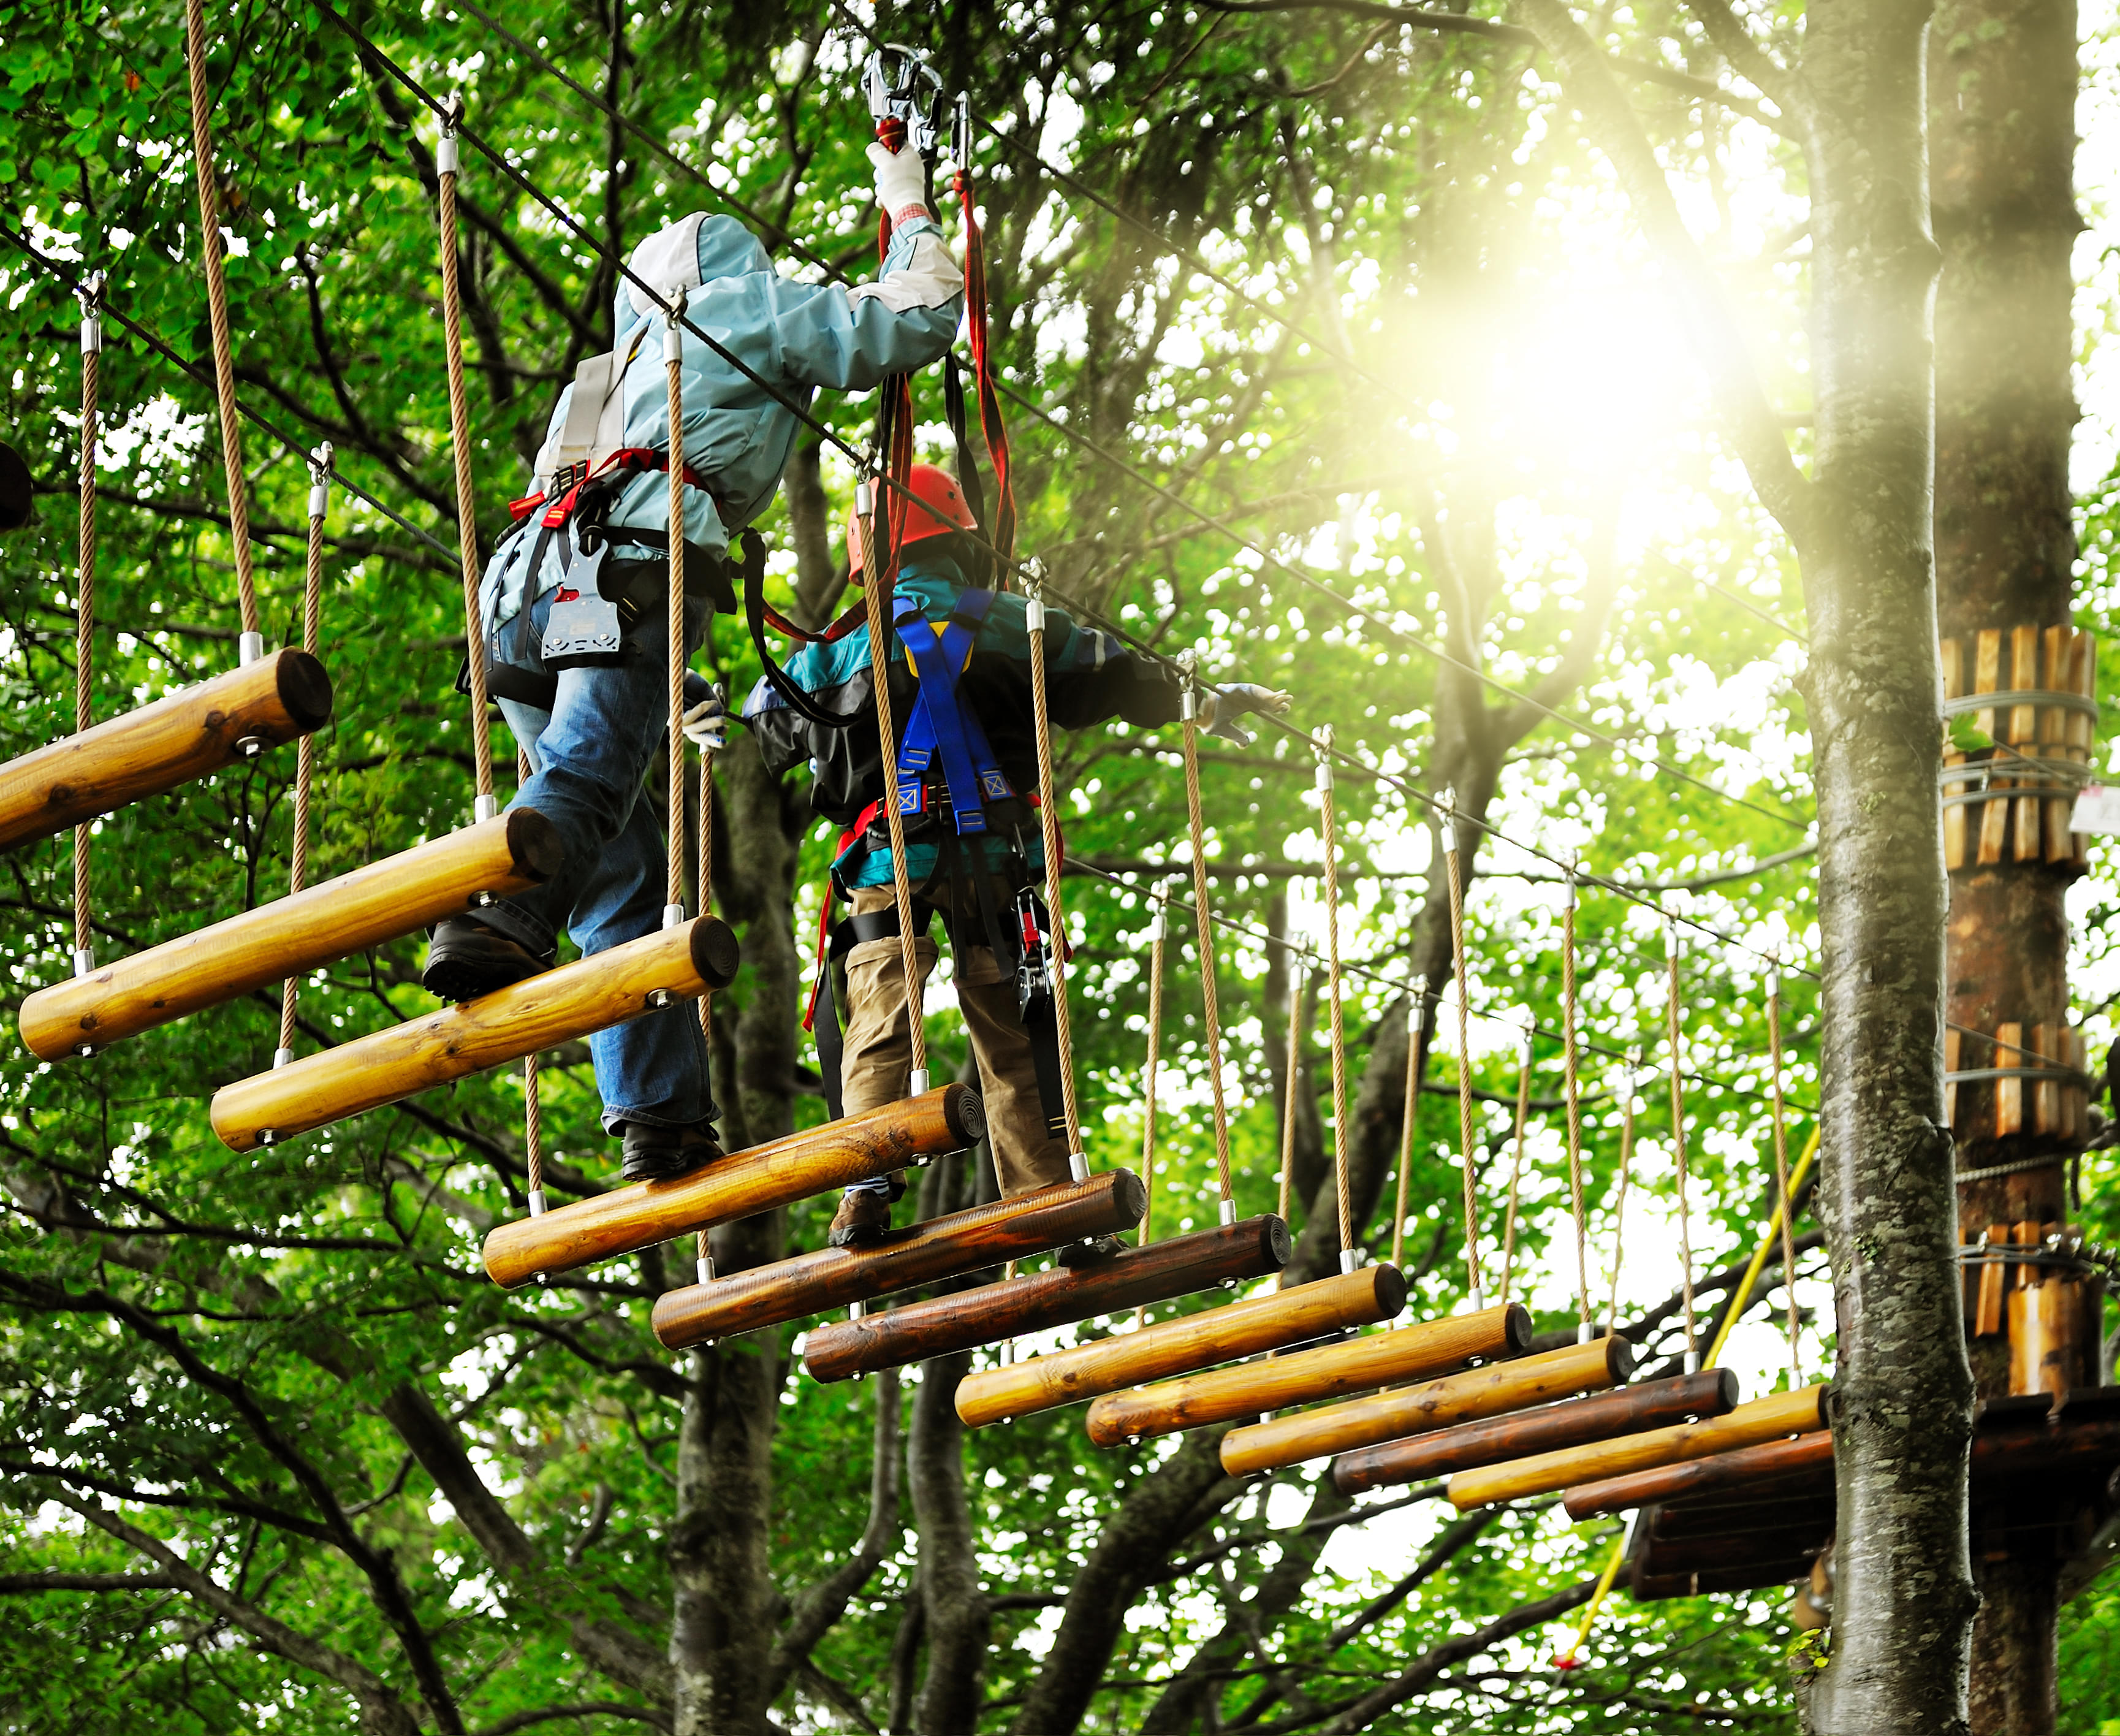 Participate in rope course activities